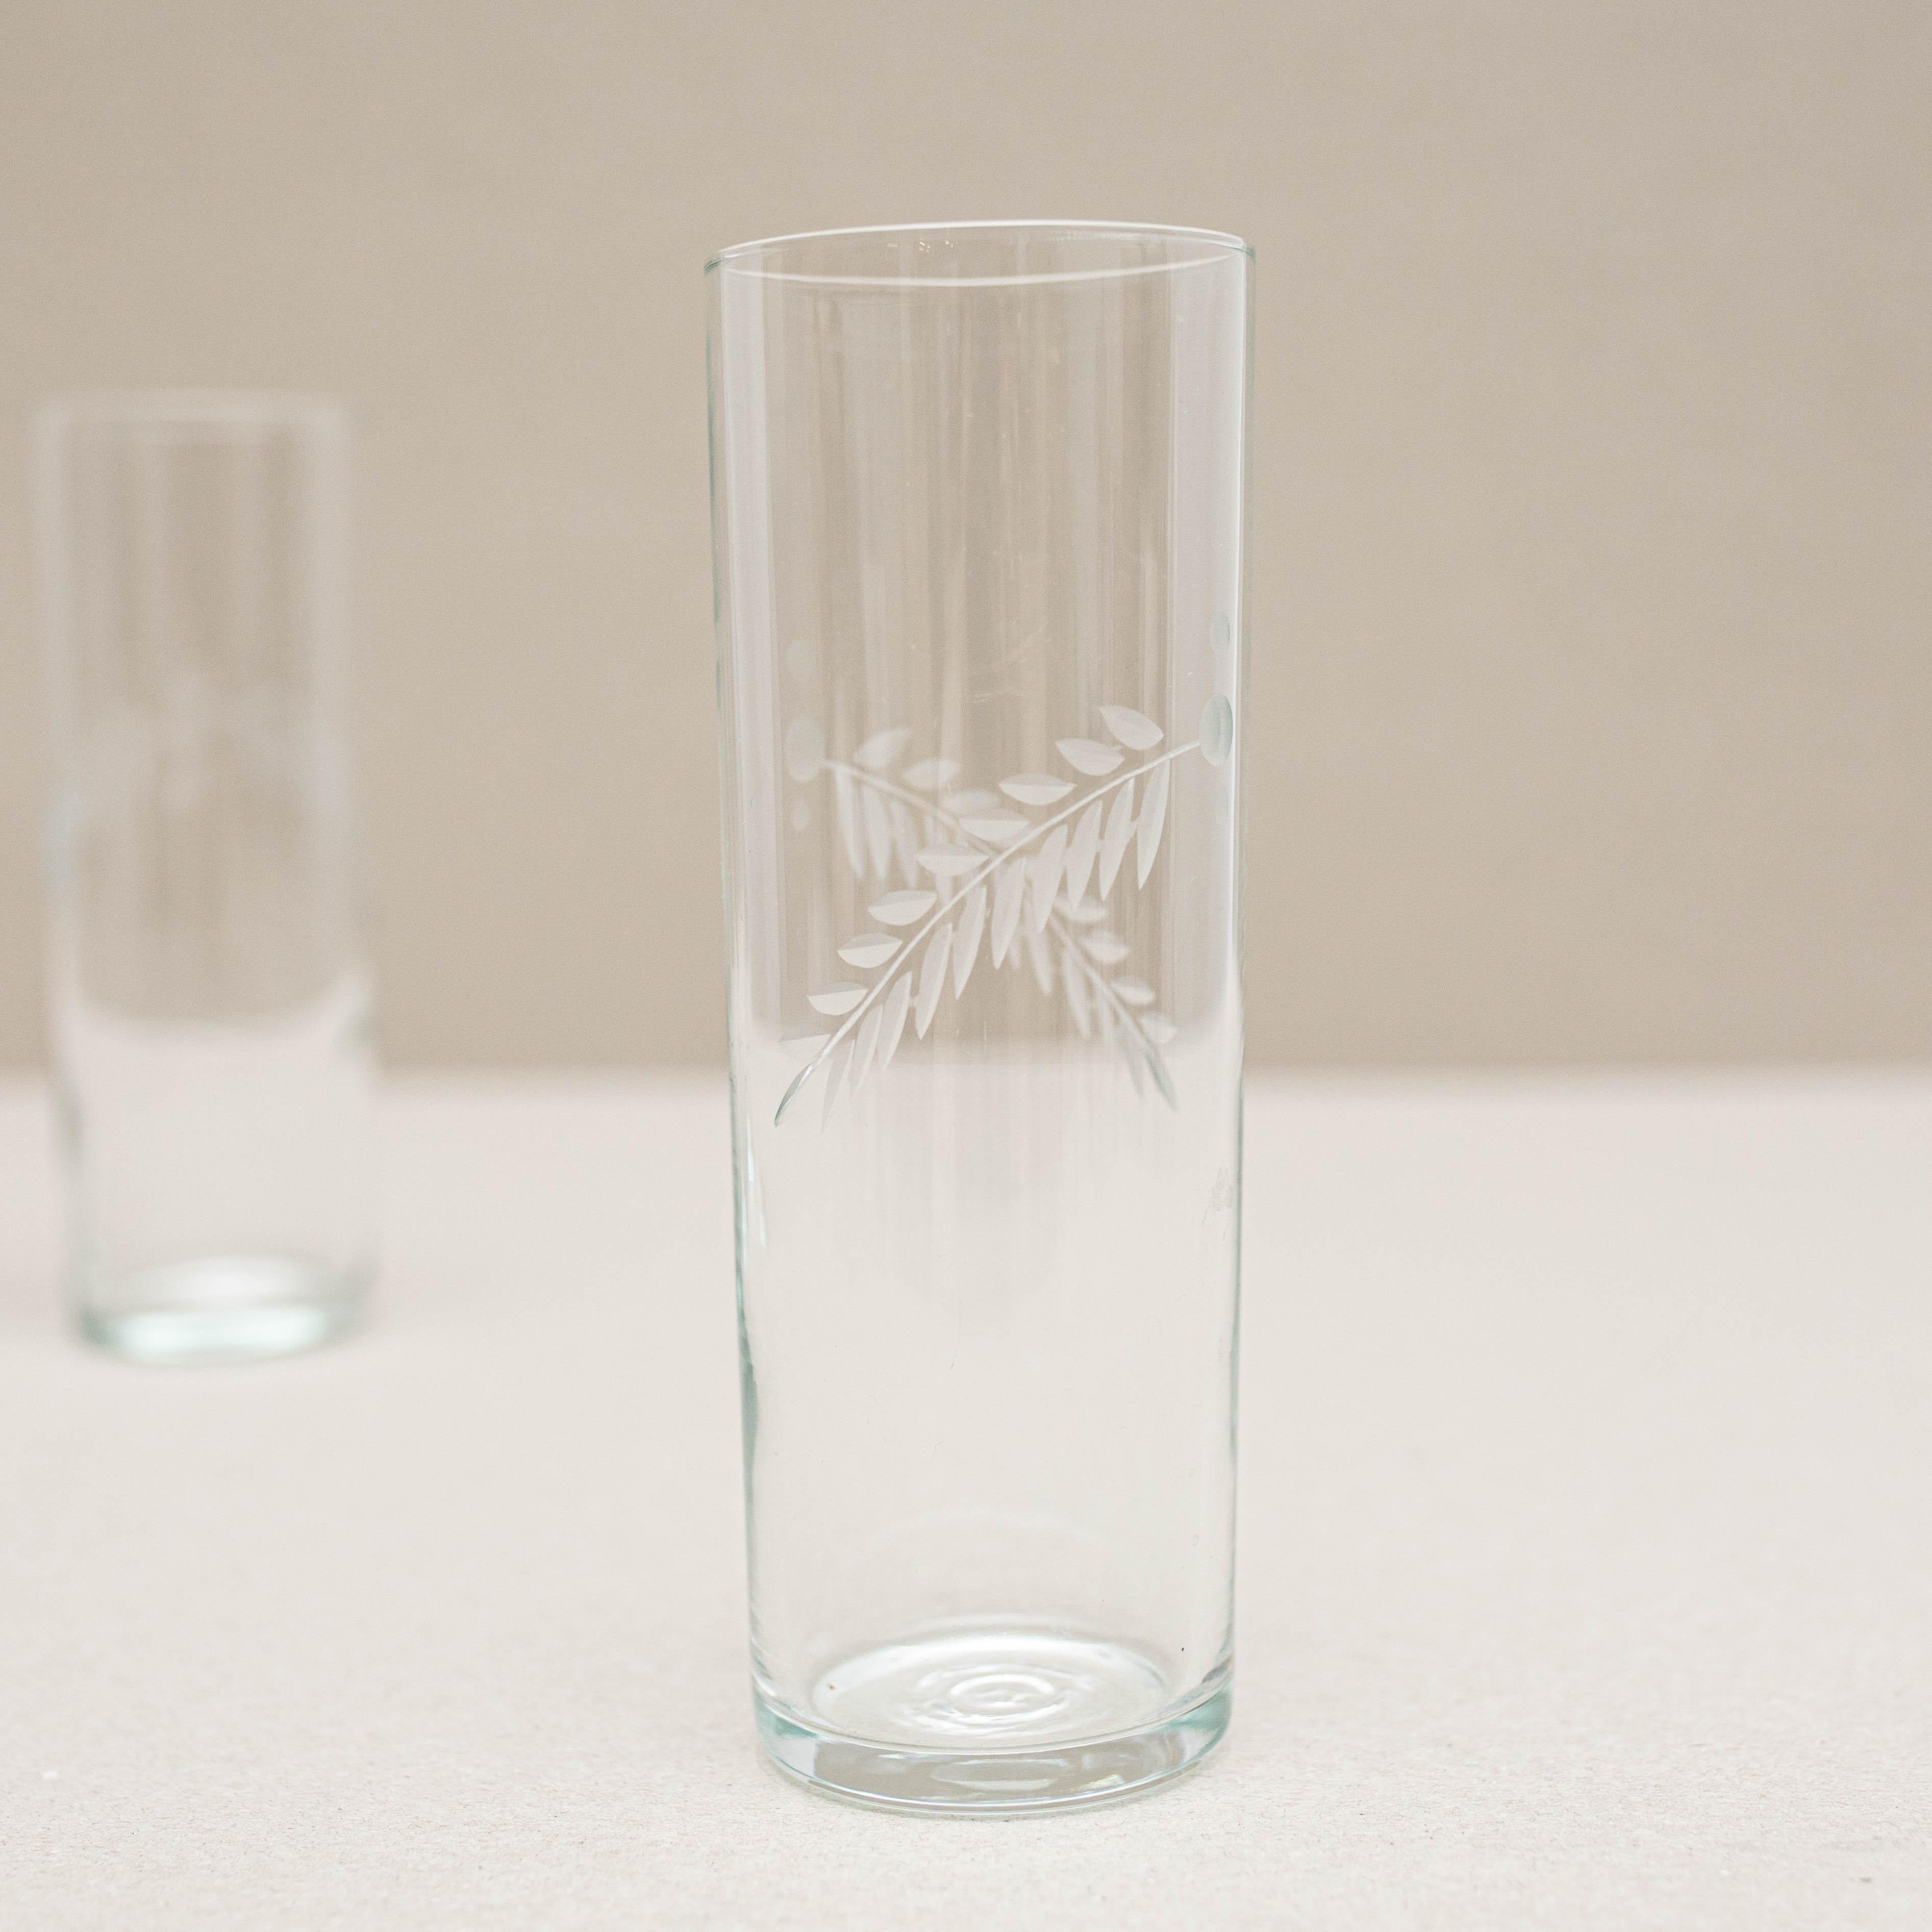 Set of 3 Antique Crystal Glasses, circa 1970 For Sale 4